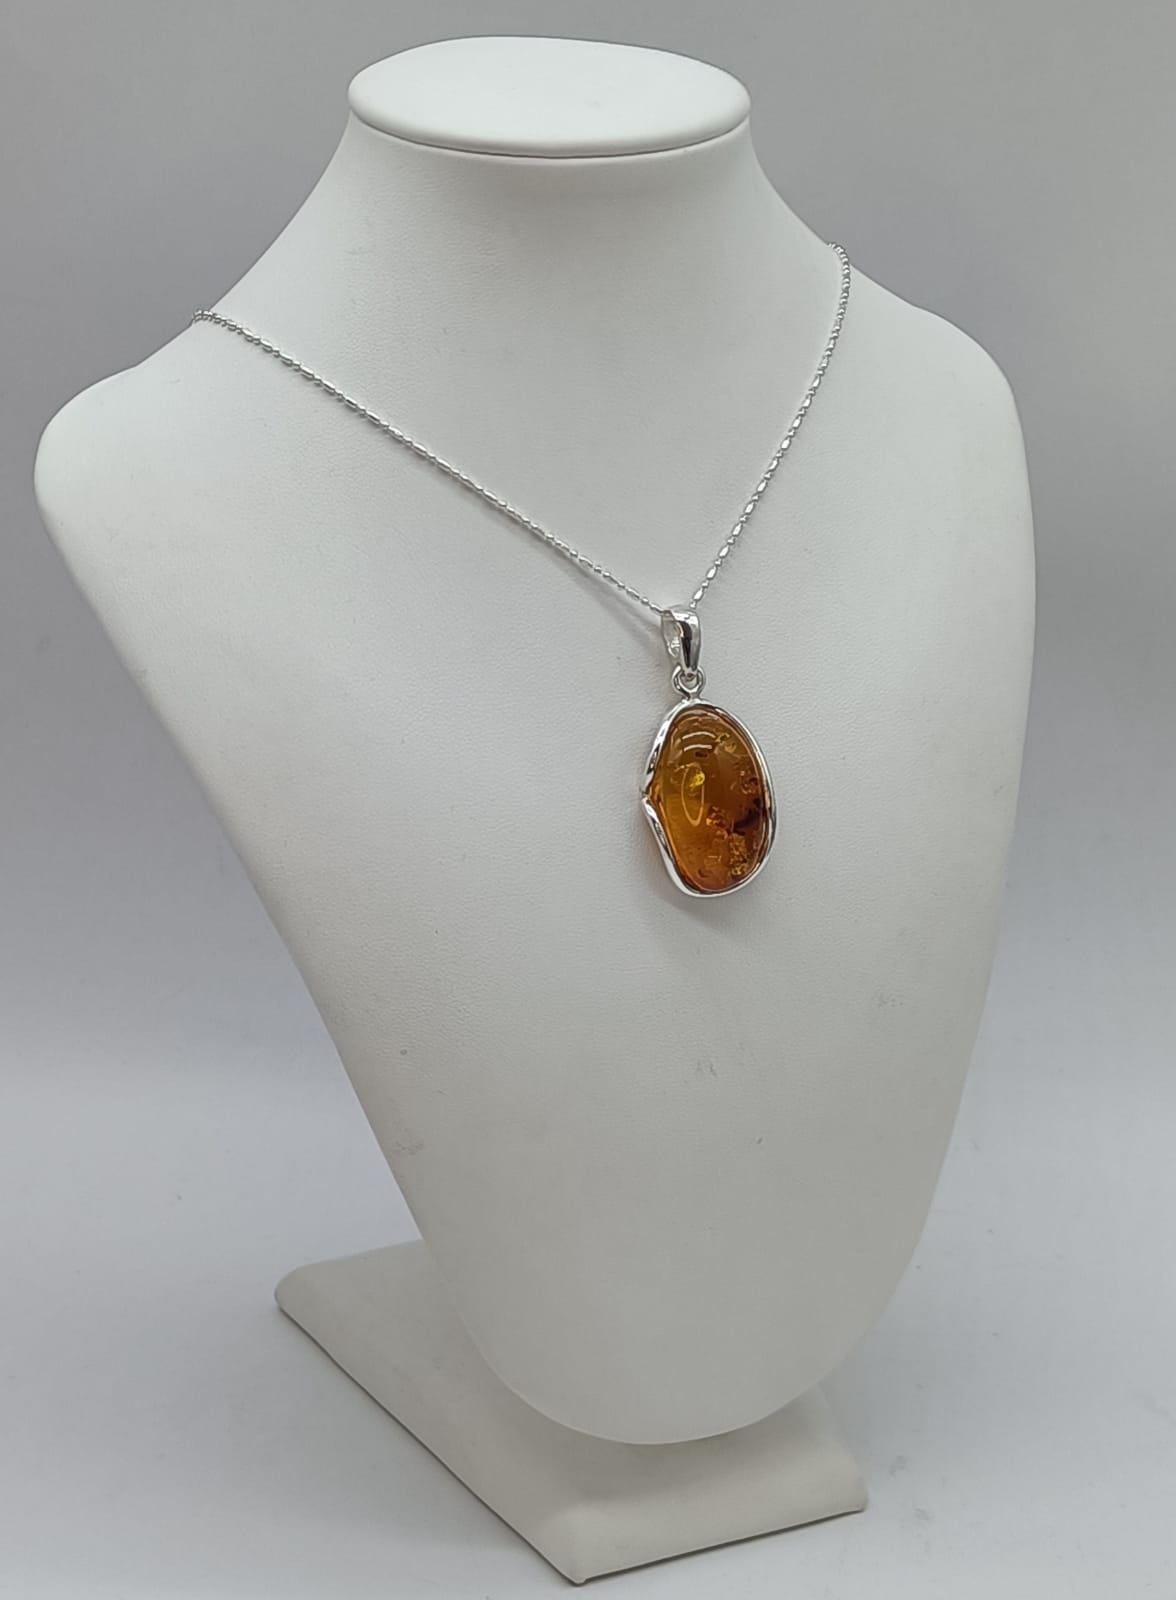 Genuine Baltic Amber 925 Sterling Silver Pendant 5.78g Crystal Wellness